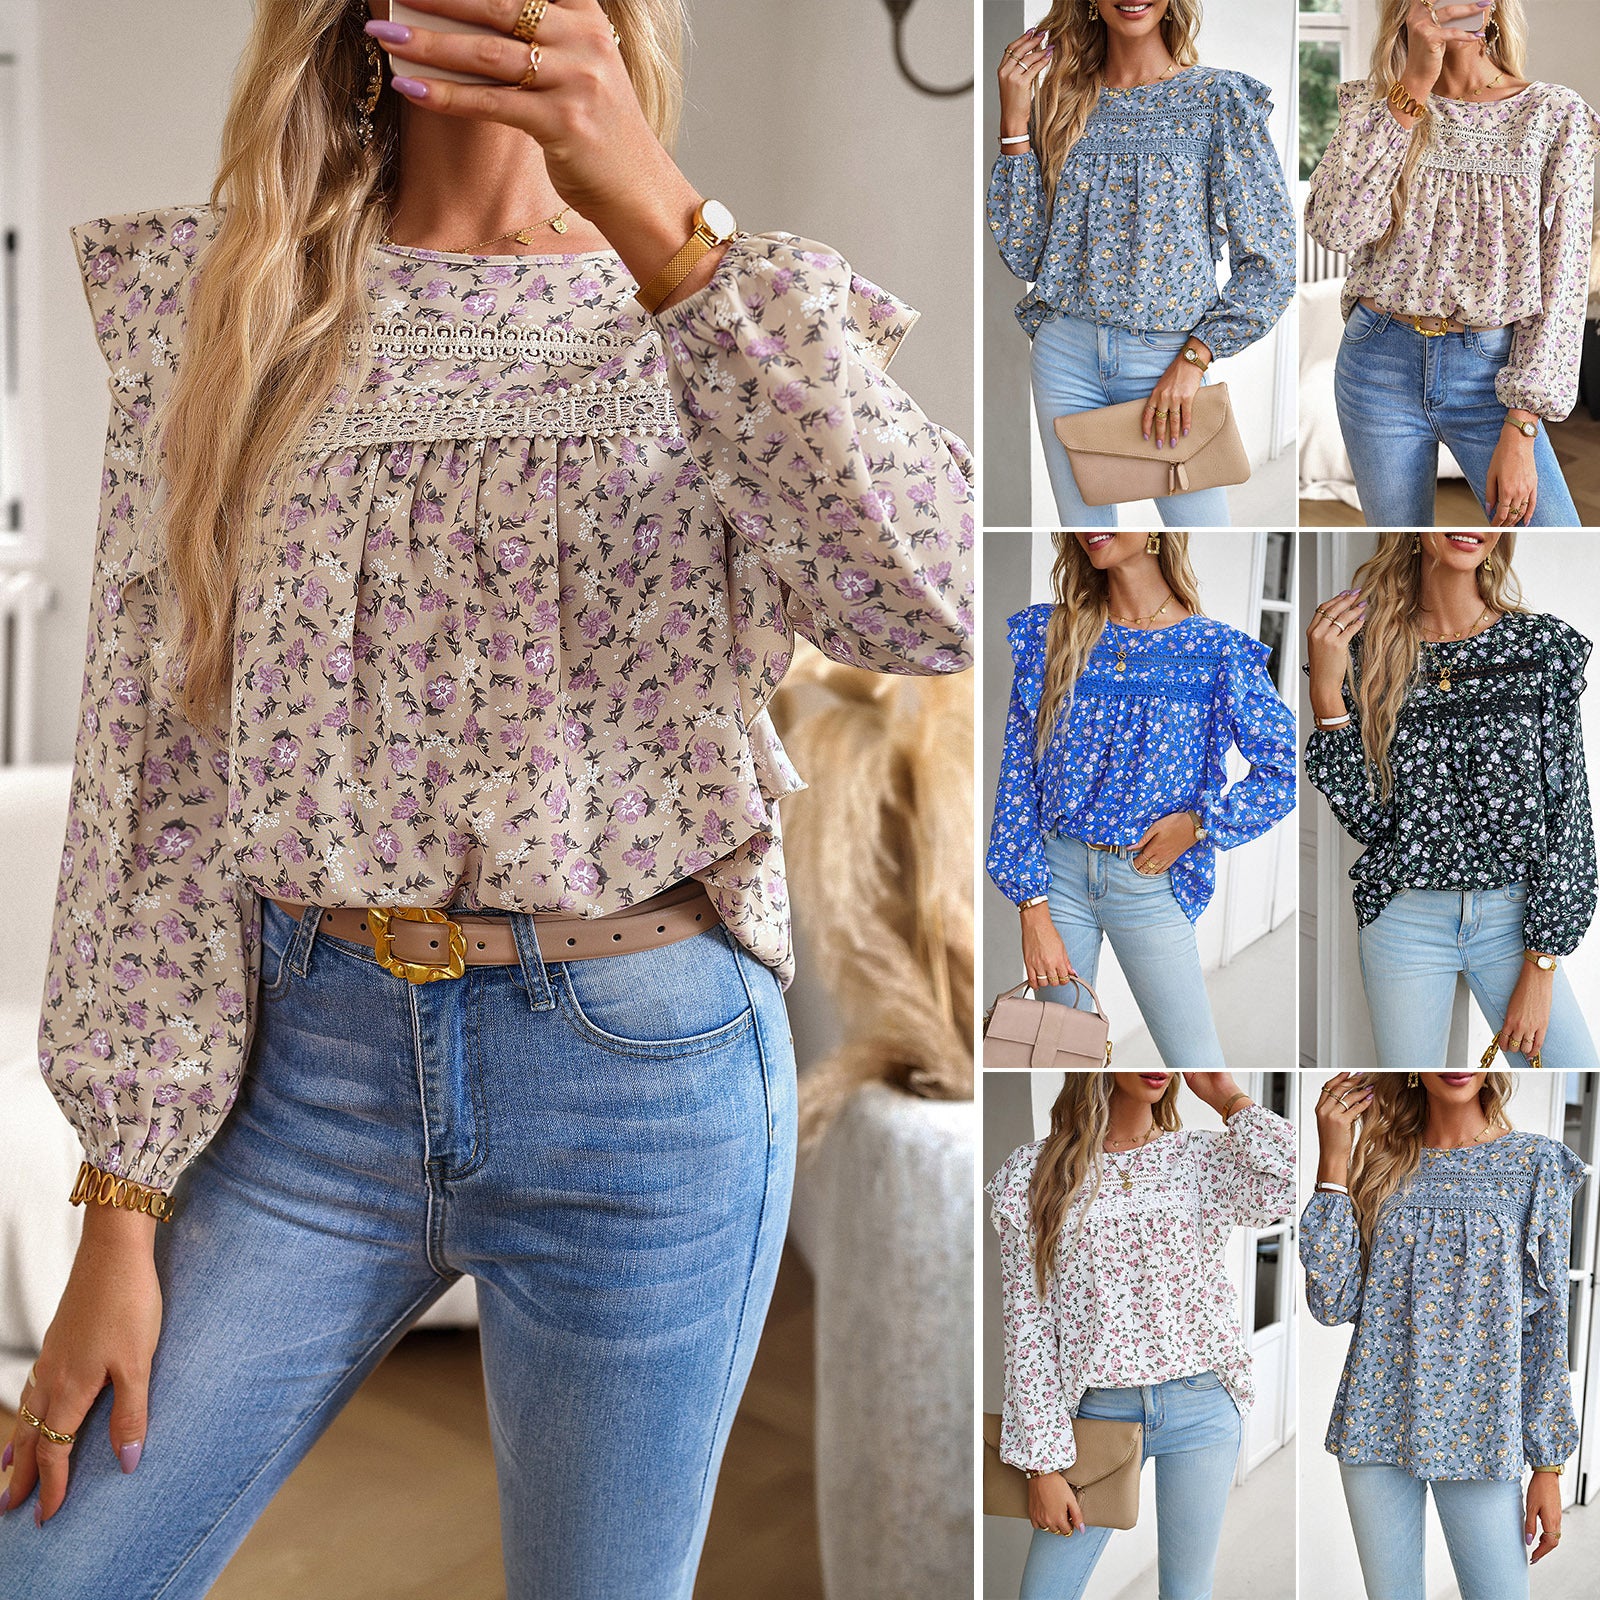 Women's Fashion Round Neck Long Sleeve Floral Shirt